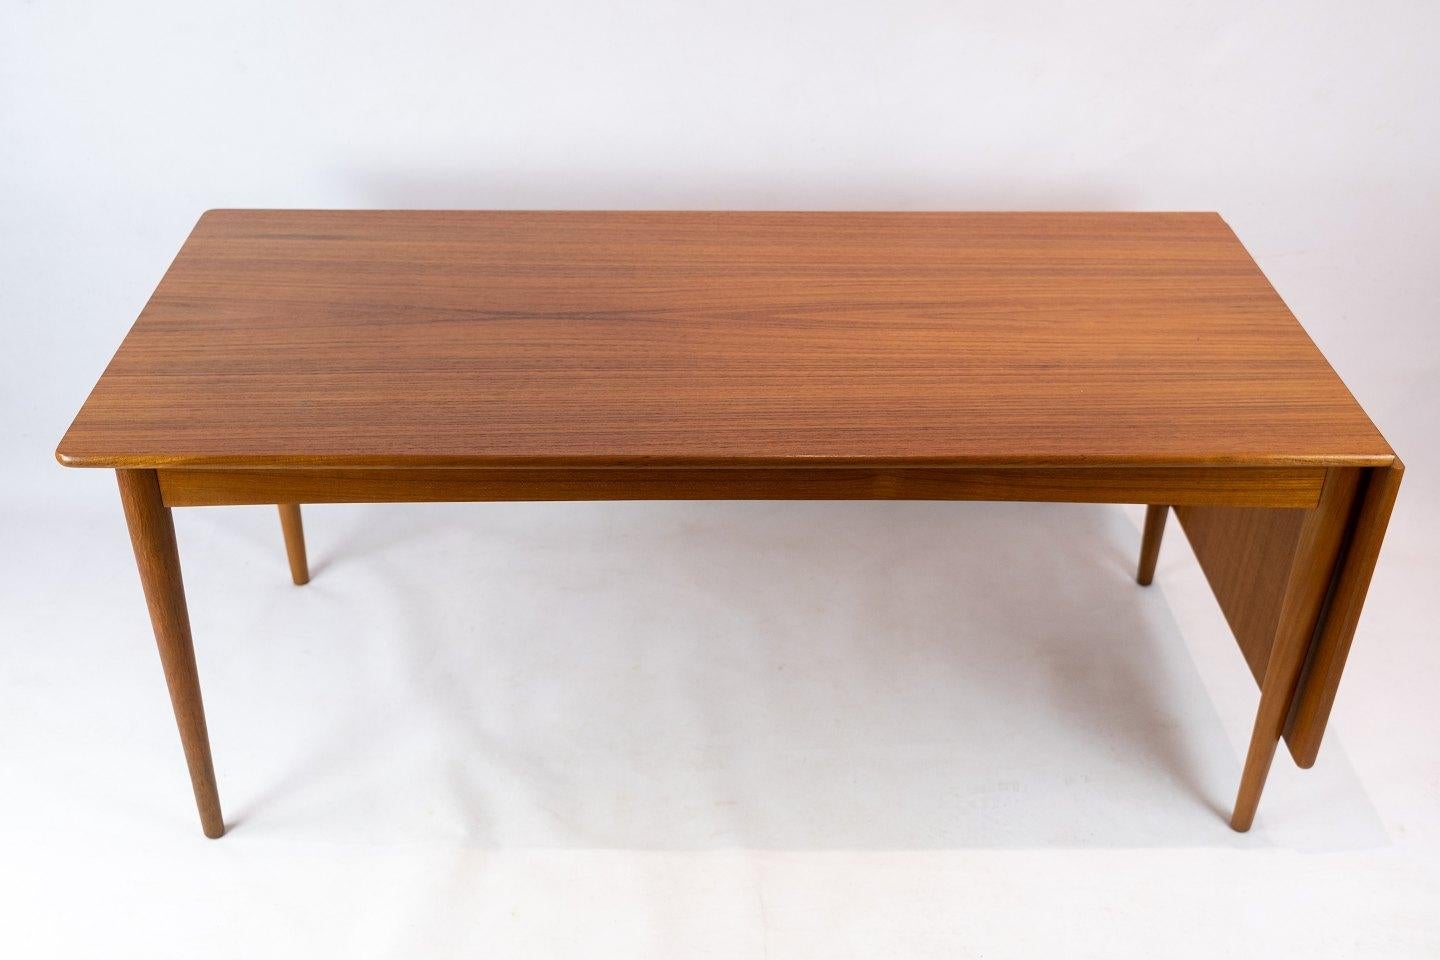 Mid-20th Century Coffee Table with Extension Leaf in Teak of Danish Design from the 1960s